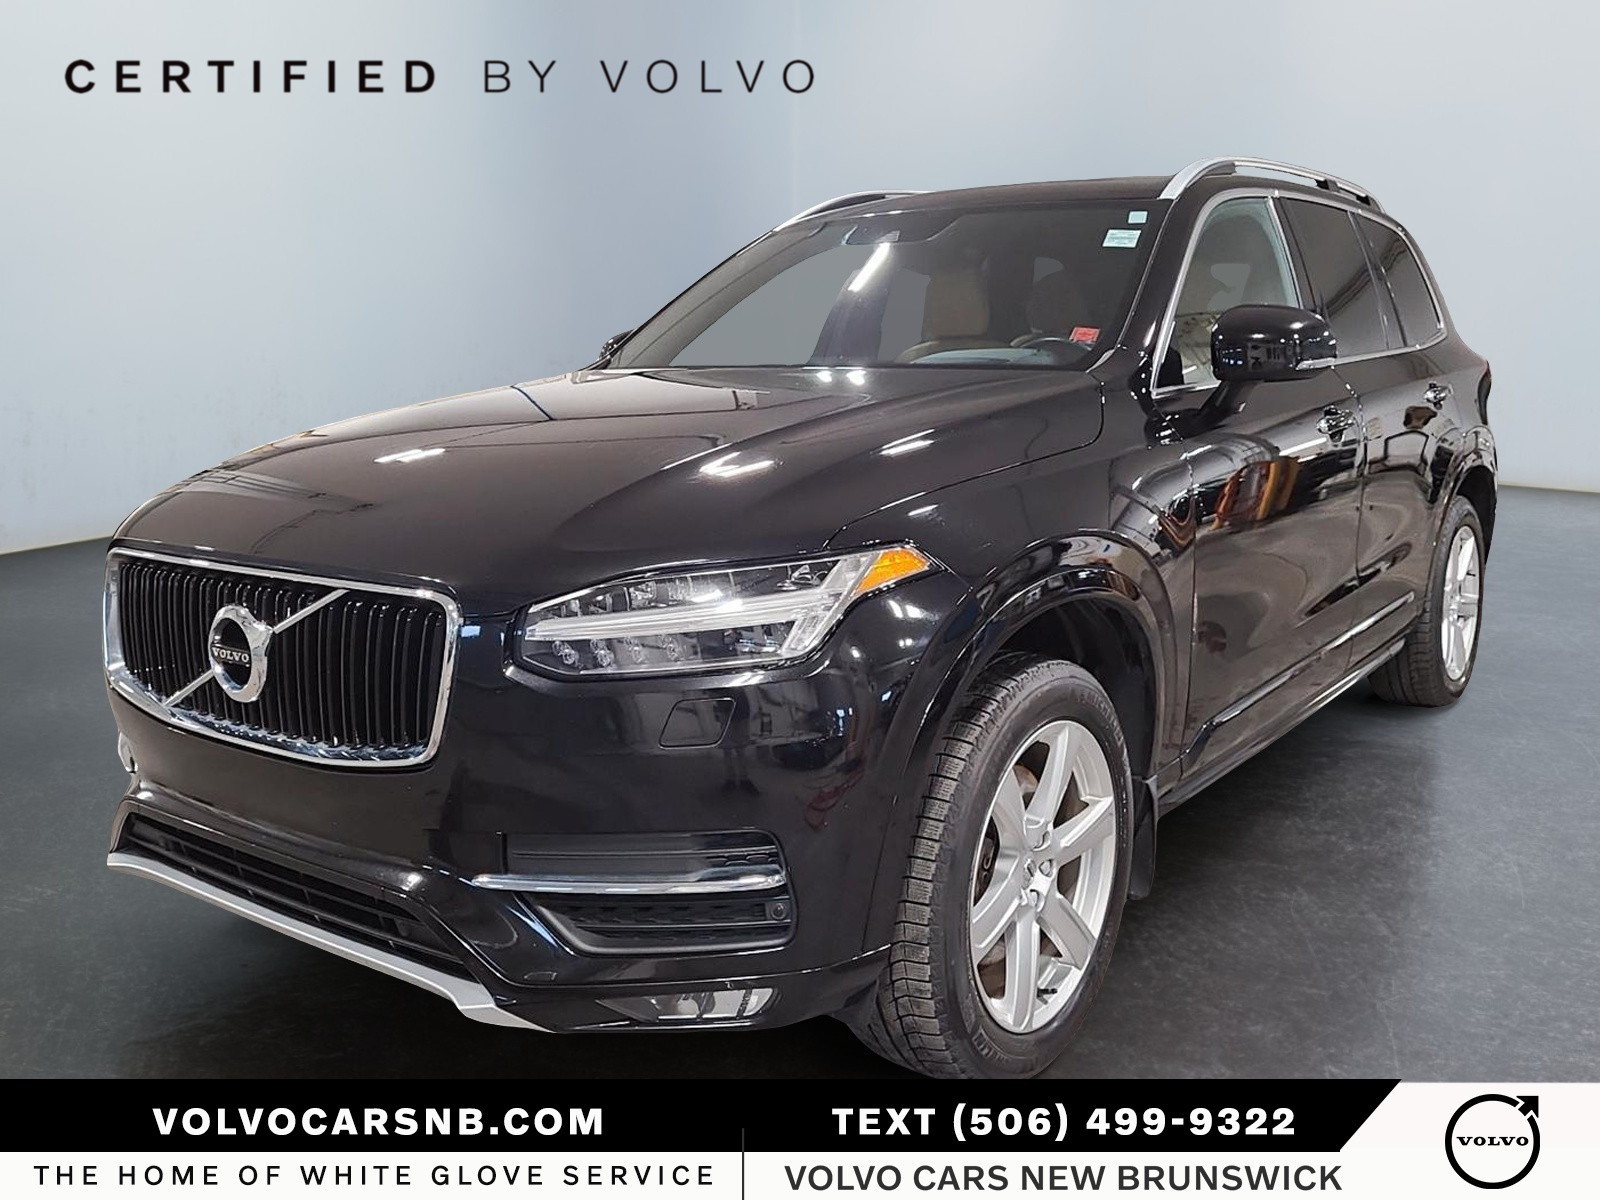 2019 Volvo XC90 Certified Pre Owned | Apple CarPlay | Remote Start